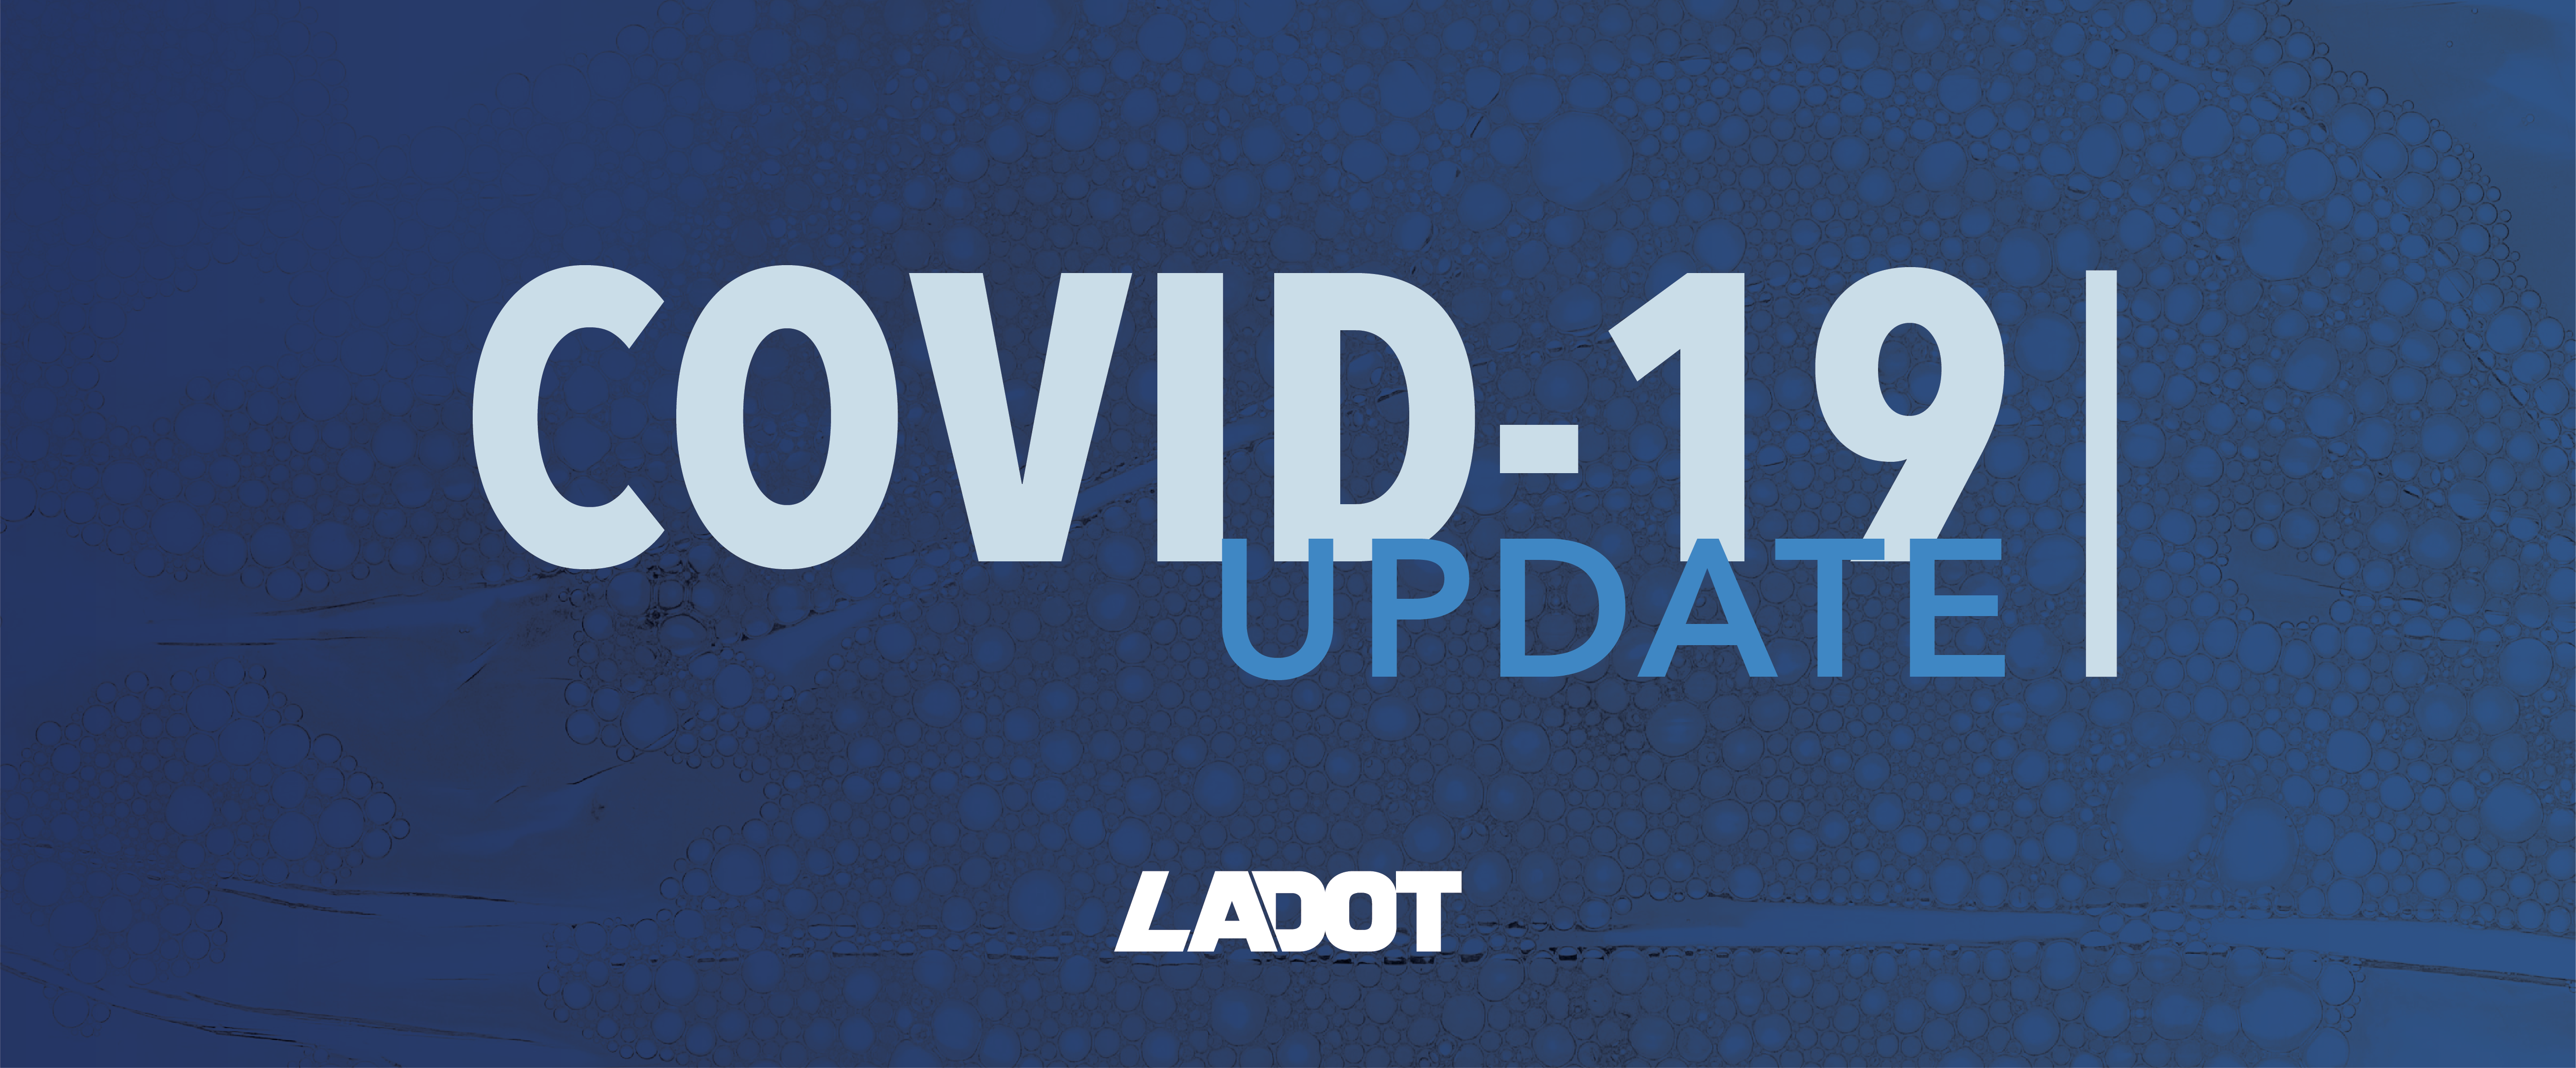 Update on COVID-19 from LADOT